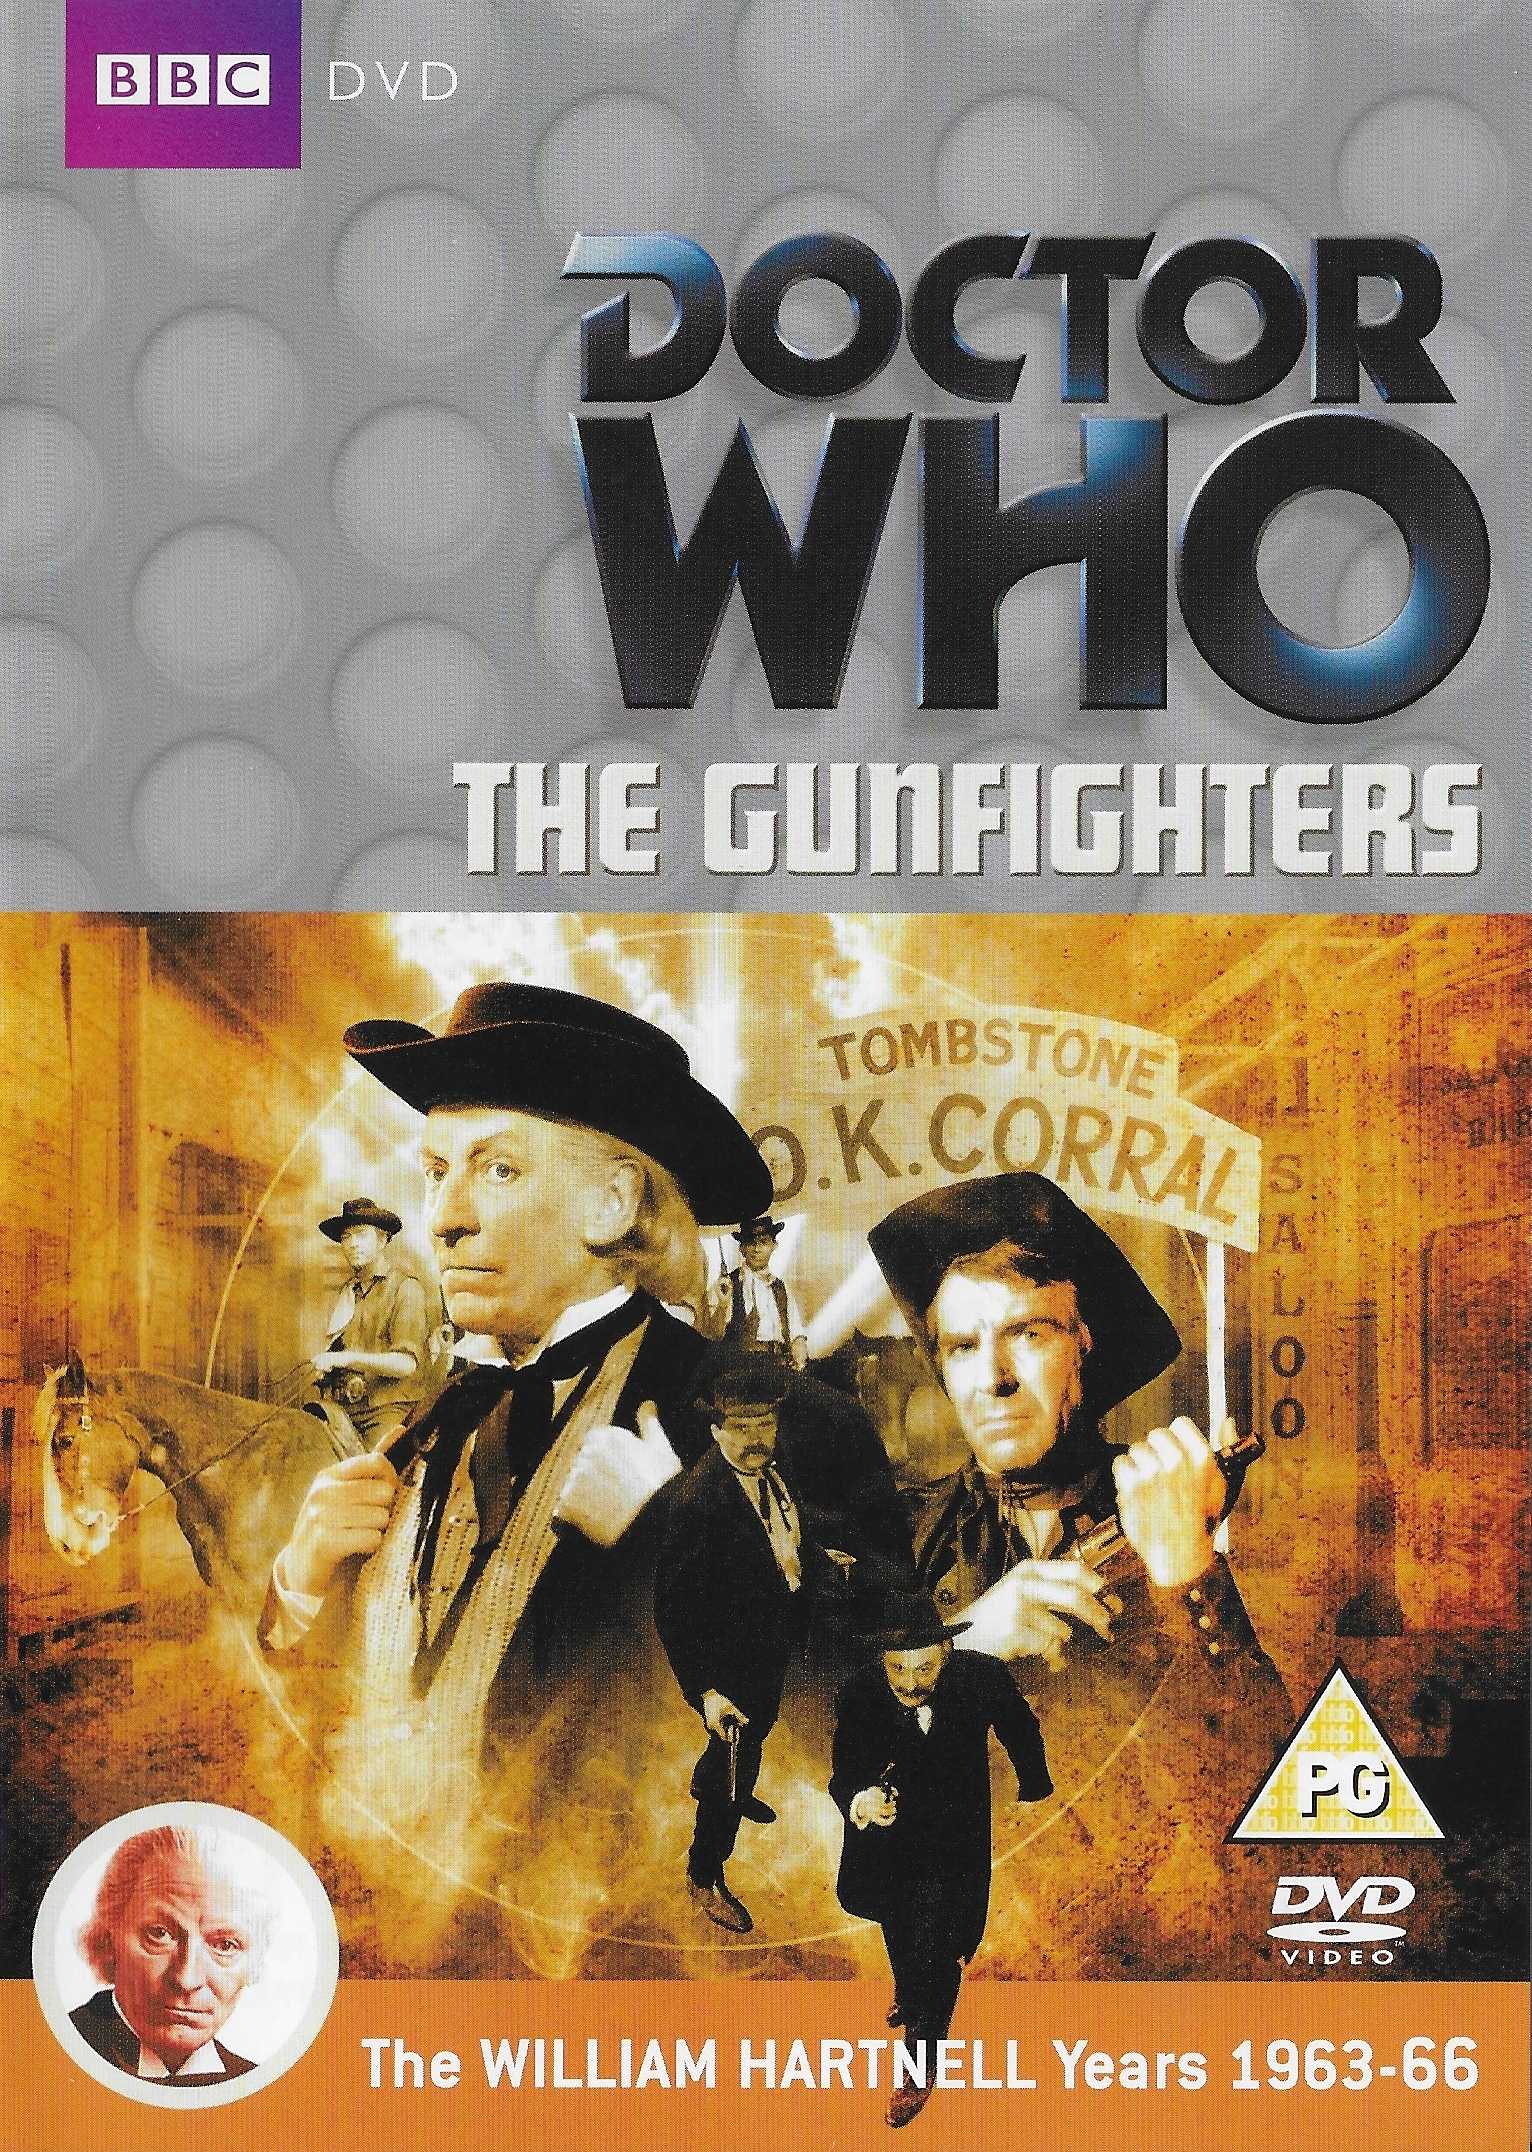 Picture of BBCDVD 3380A Doctor Who - The gunfighters by artist Donald Cotton from the BBC records and Tapes library